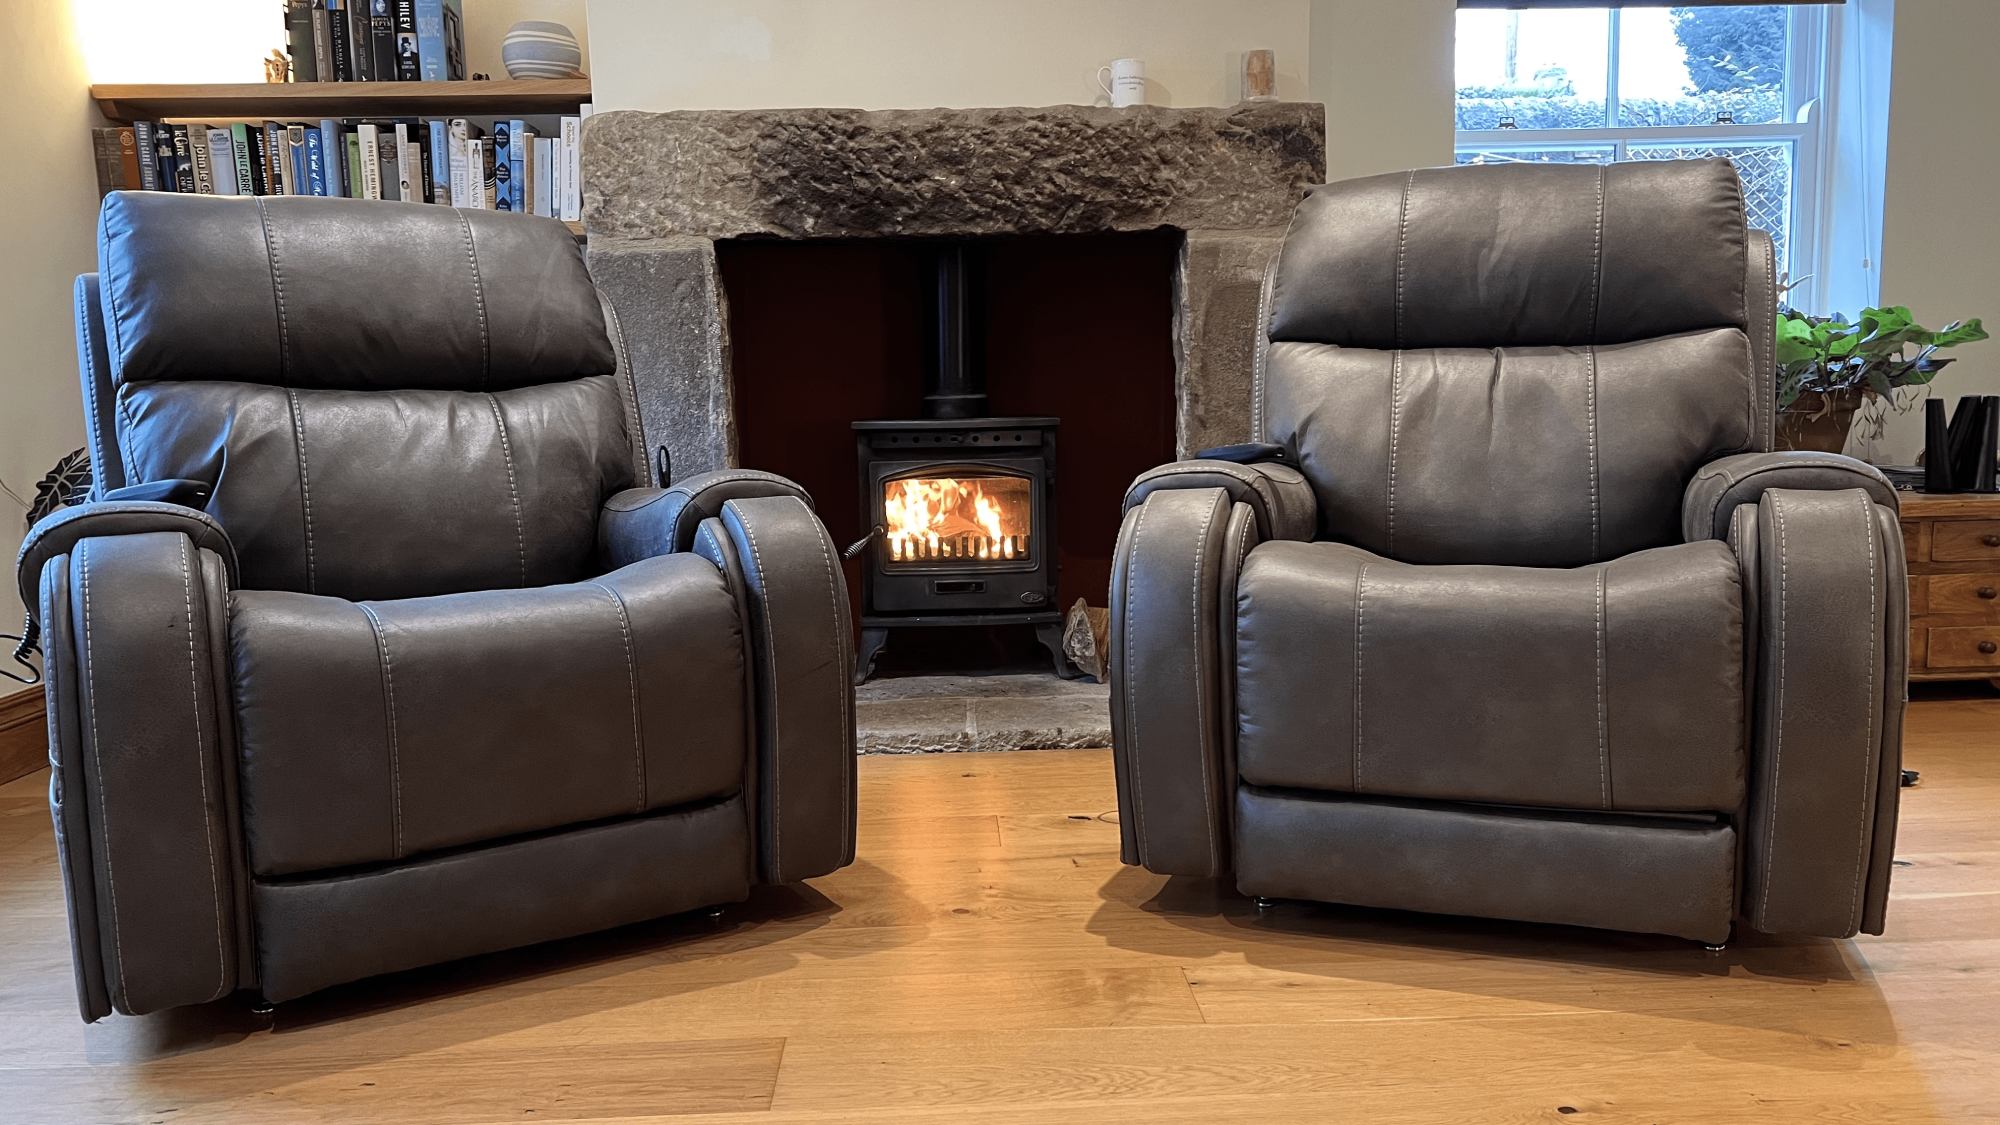 Why choose a leather riser recliner chair?